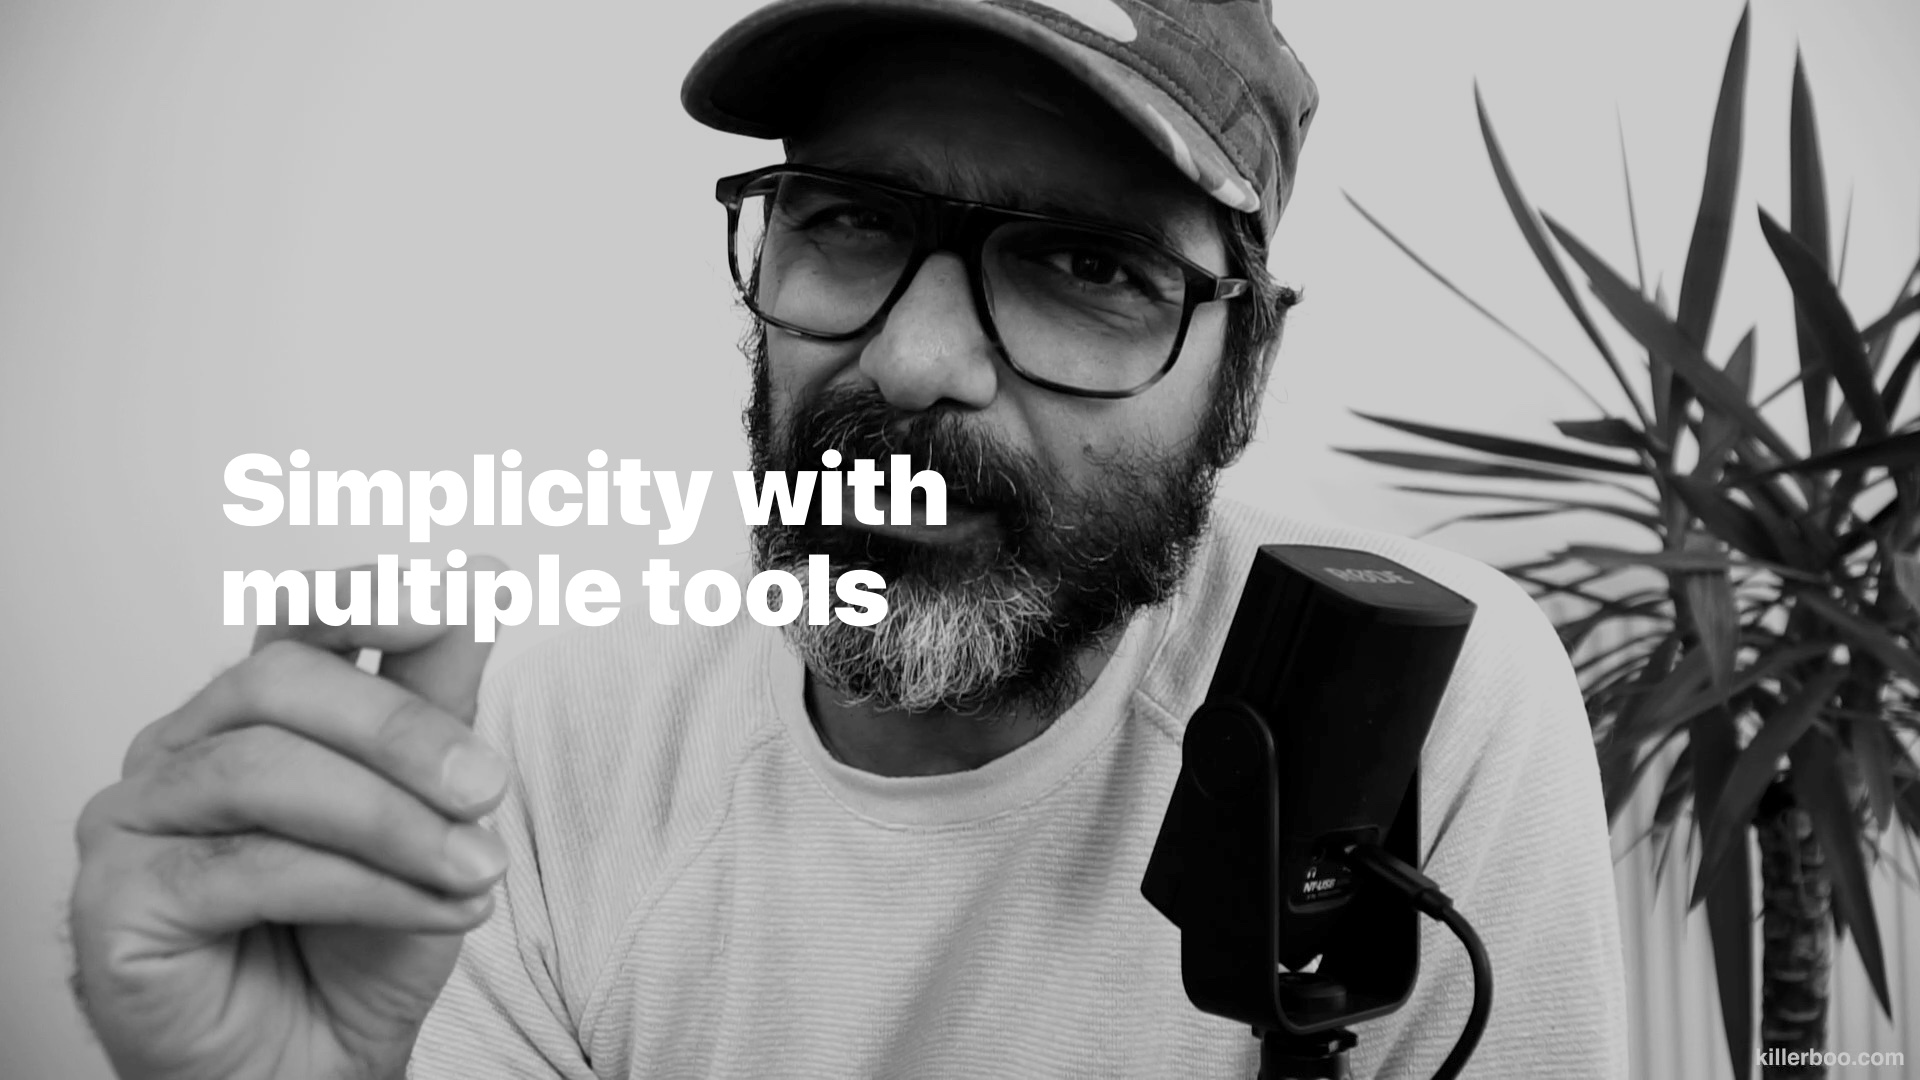 Simplicity with multiple tools